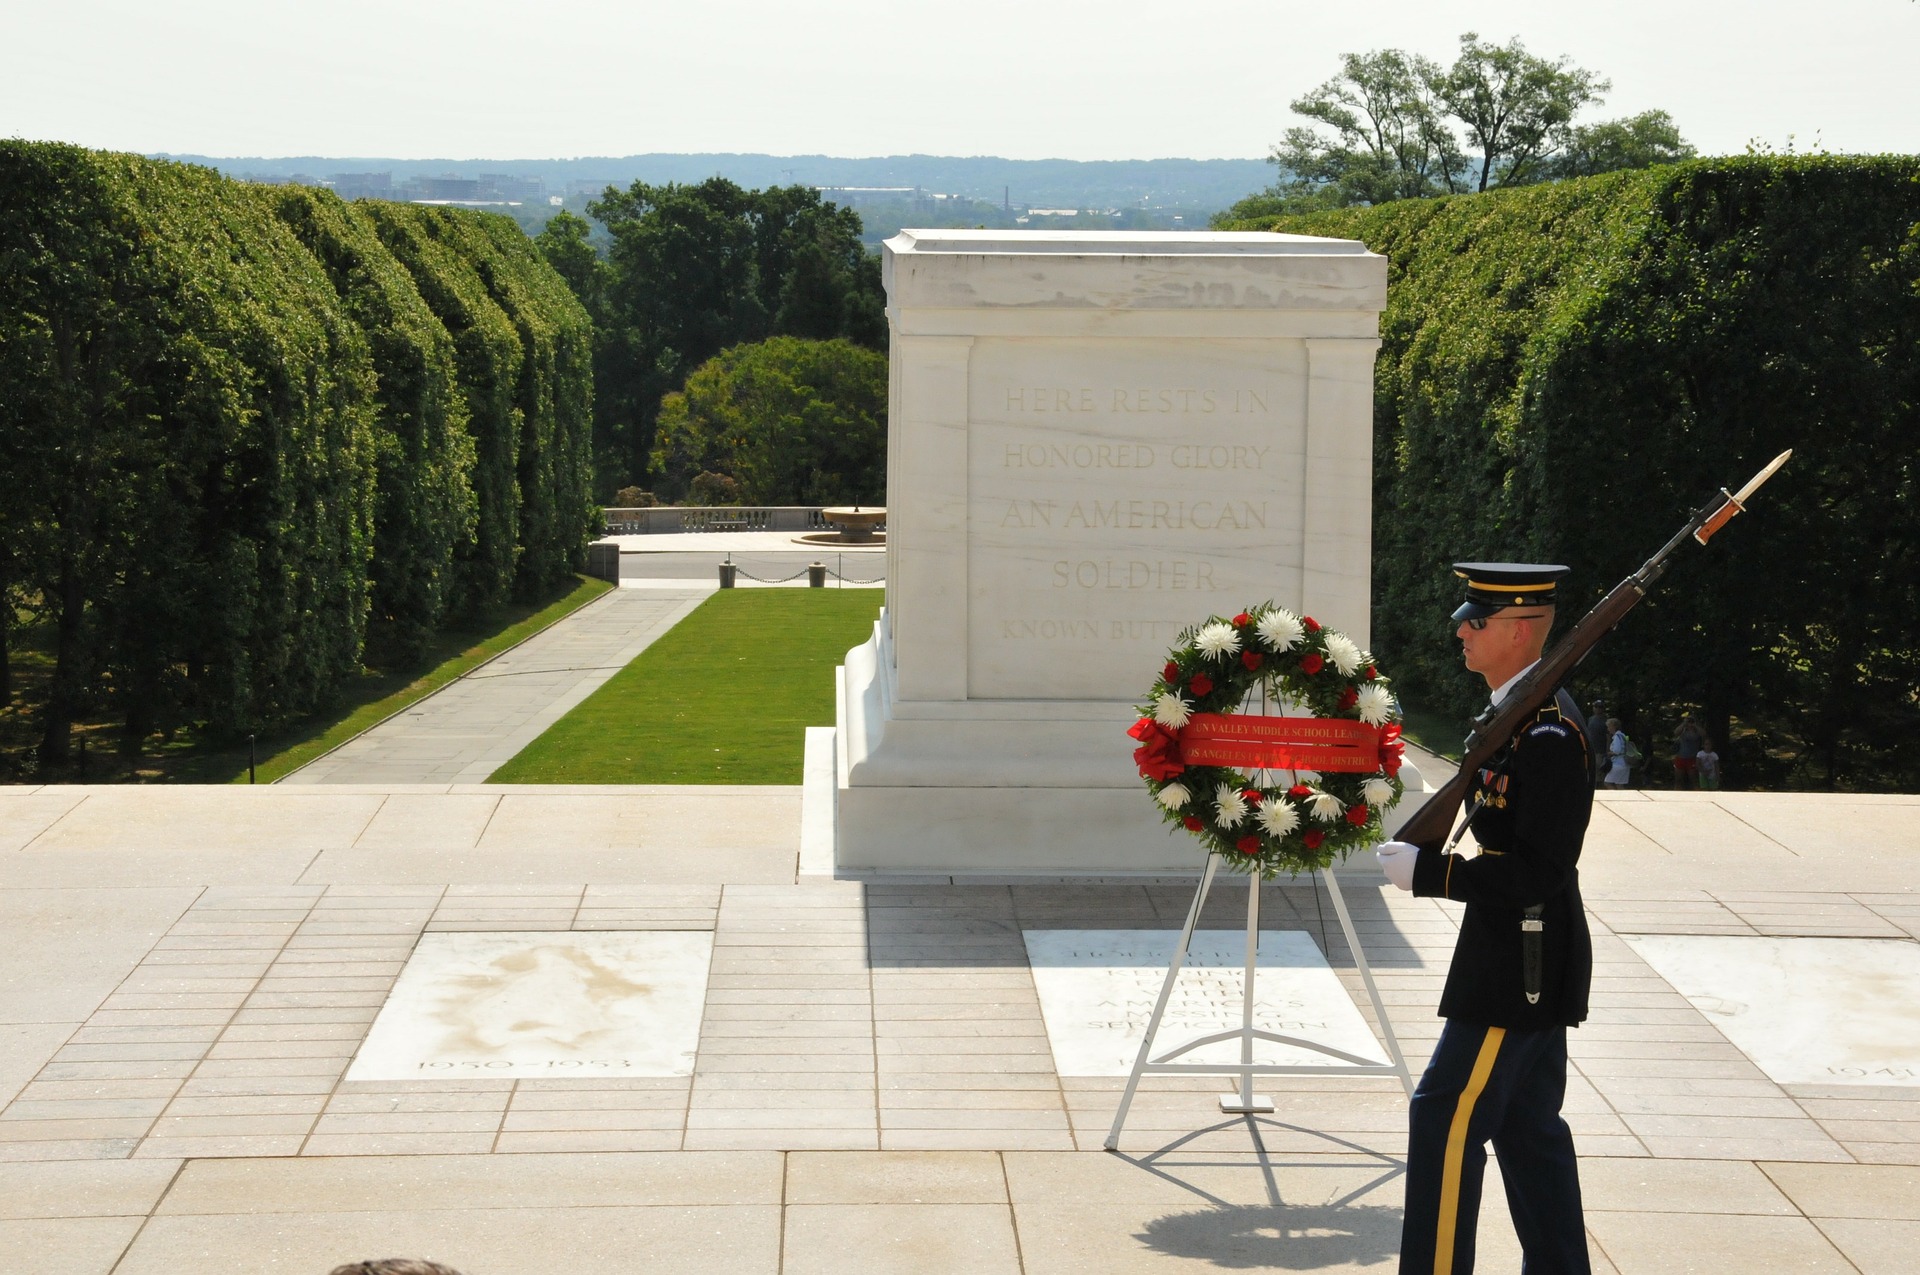 the unknown soldier